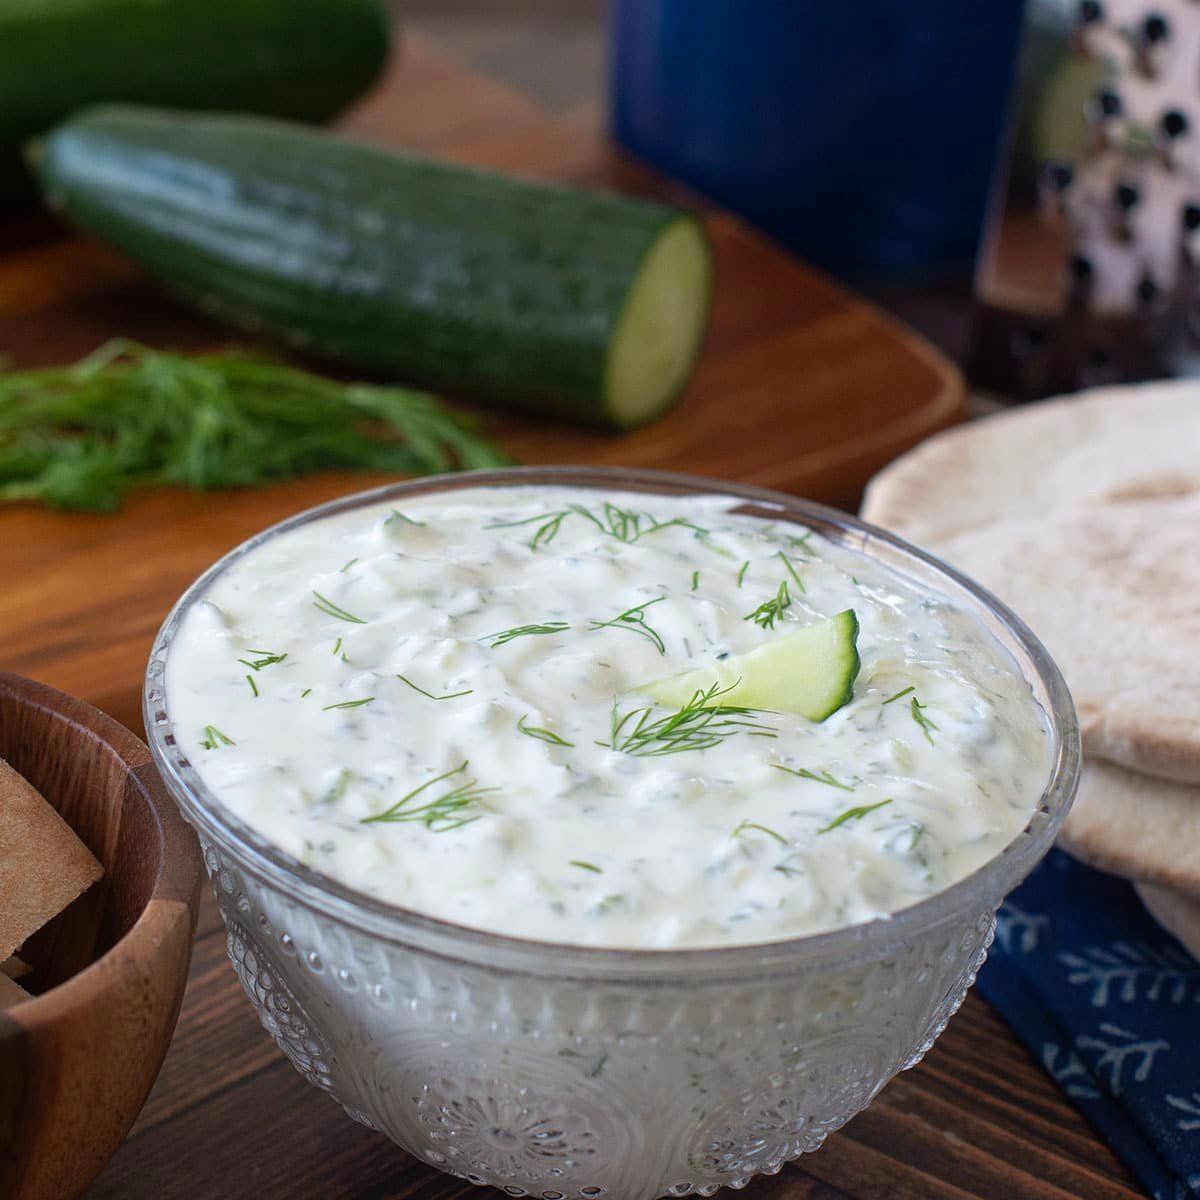 Glass bowl with tzatziki sauce, cucumbers in background.